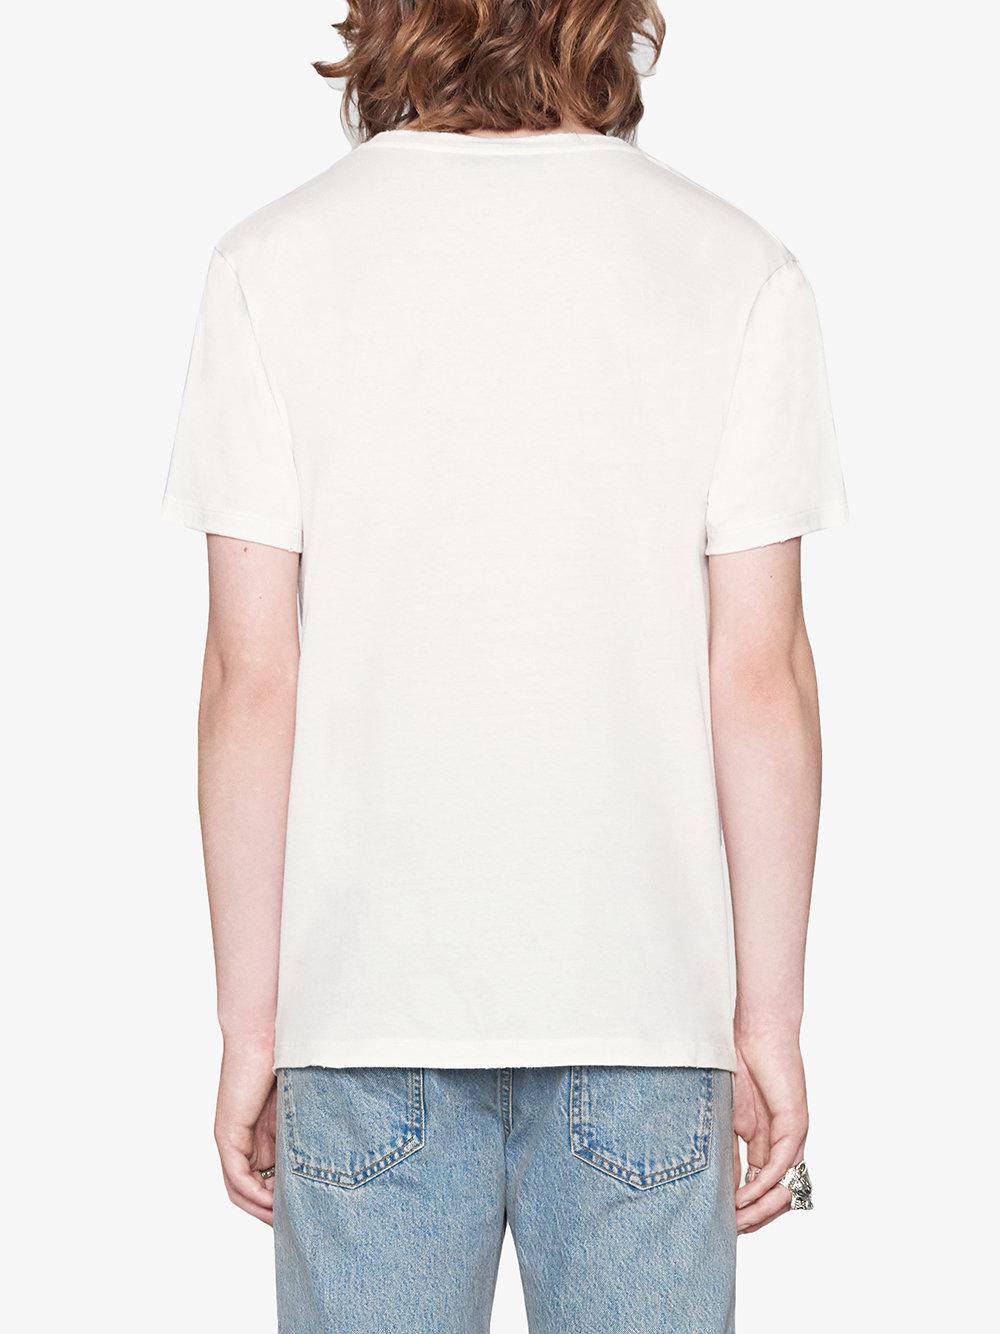 Gucci "fy Yourself" Print T-shirt for Men - Lyst